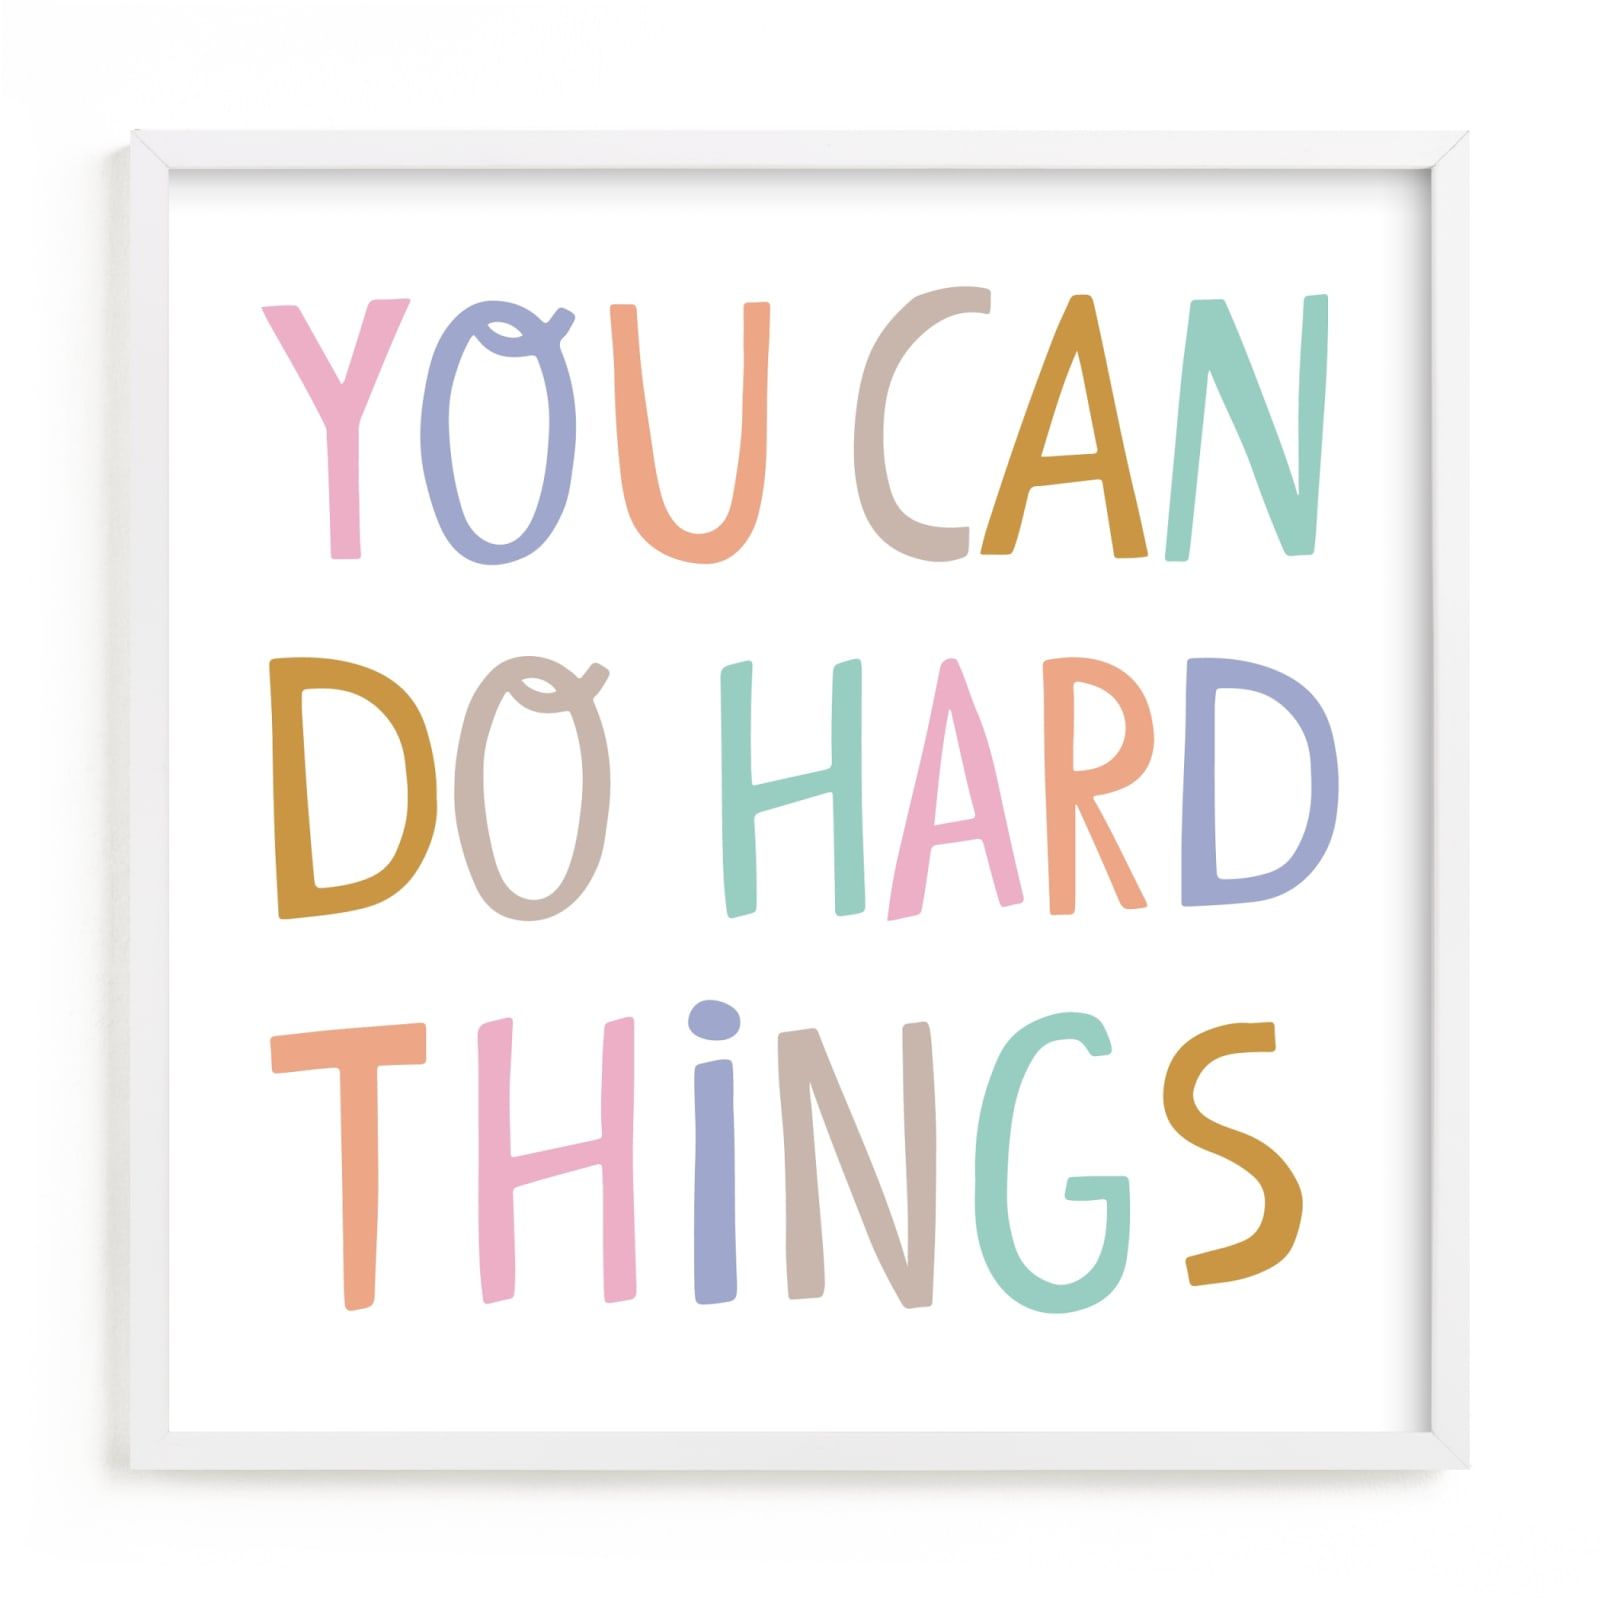 "You can" - Graphic Limited Edition Art Print by Nadia Hassan. | Minted